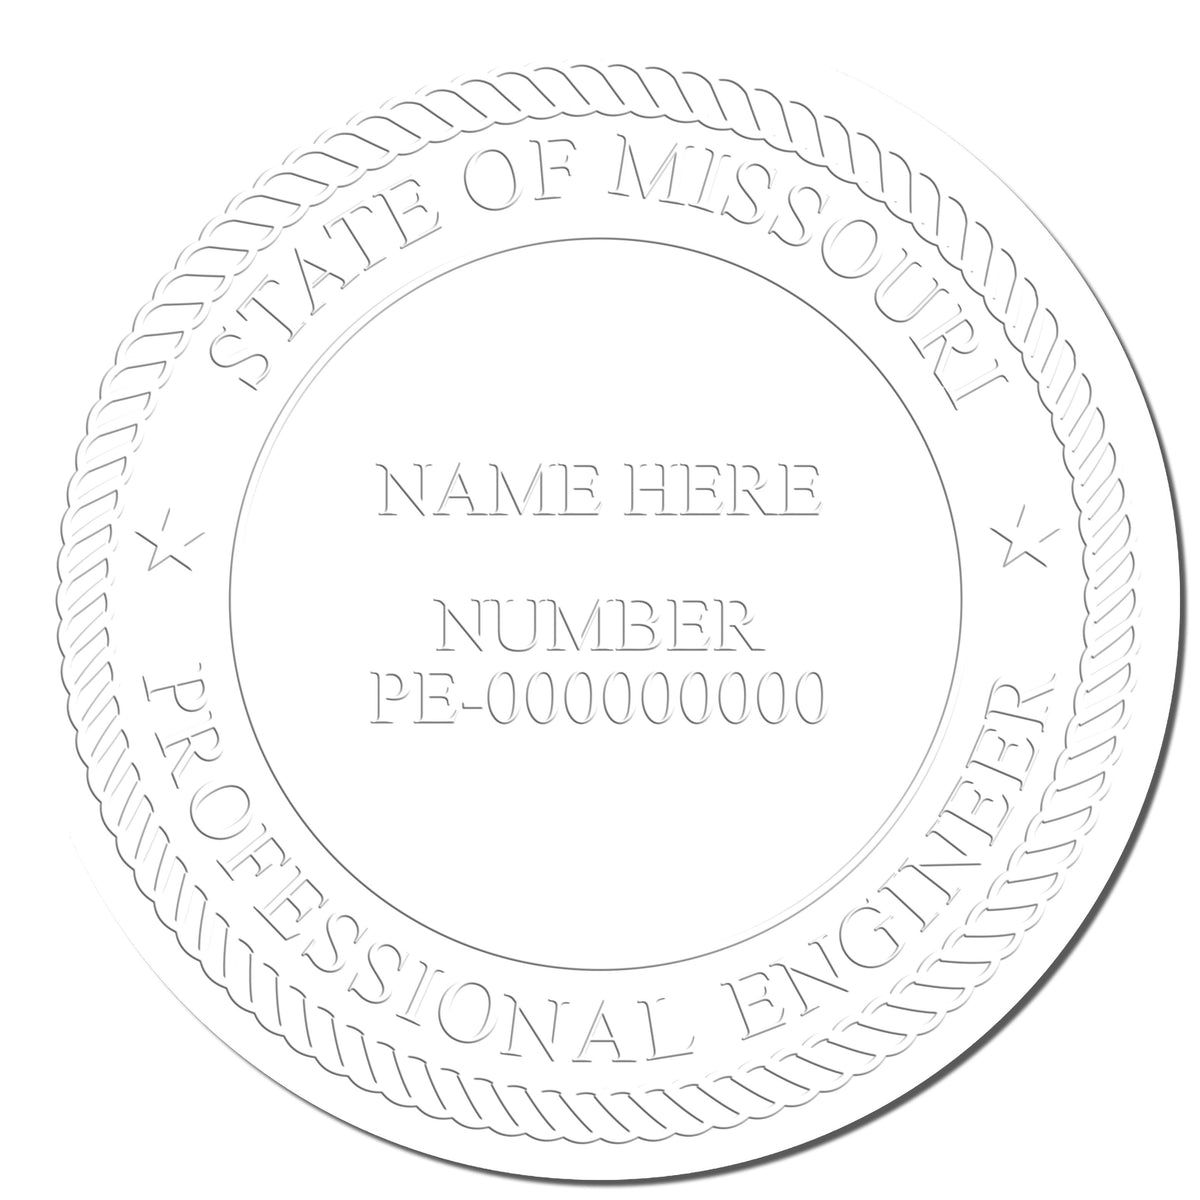 The Long Reach Missouri PE Seal stamp impression comes to life with a crisp, detailed photo on paper - showcasing true professional quality.